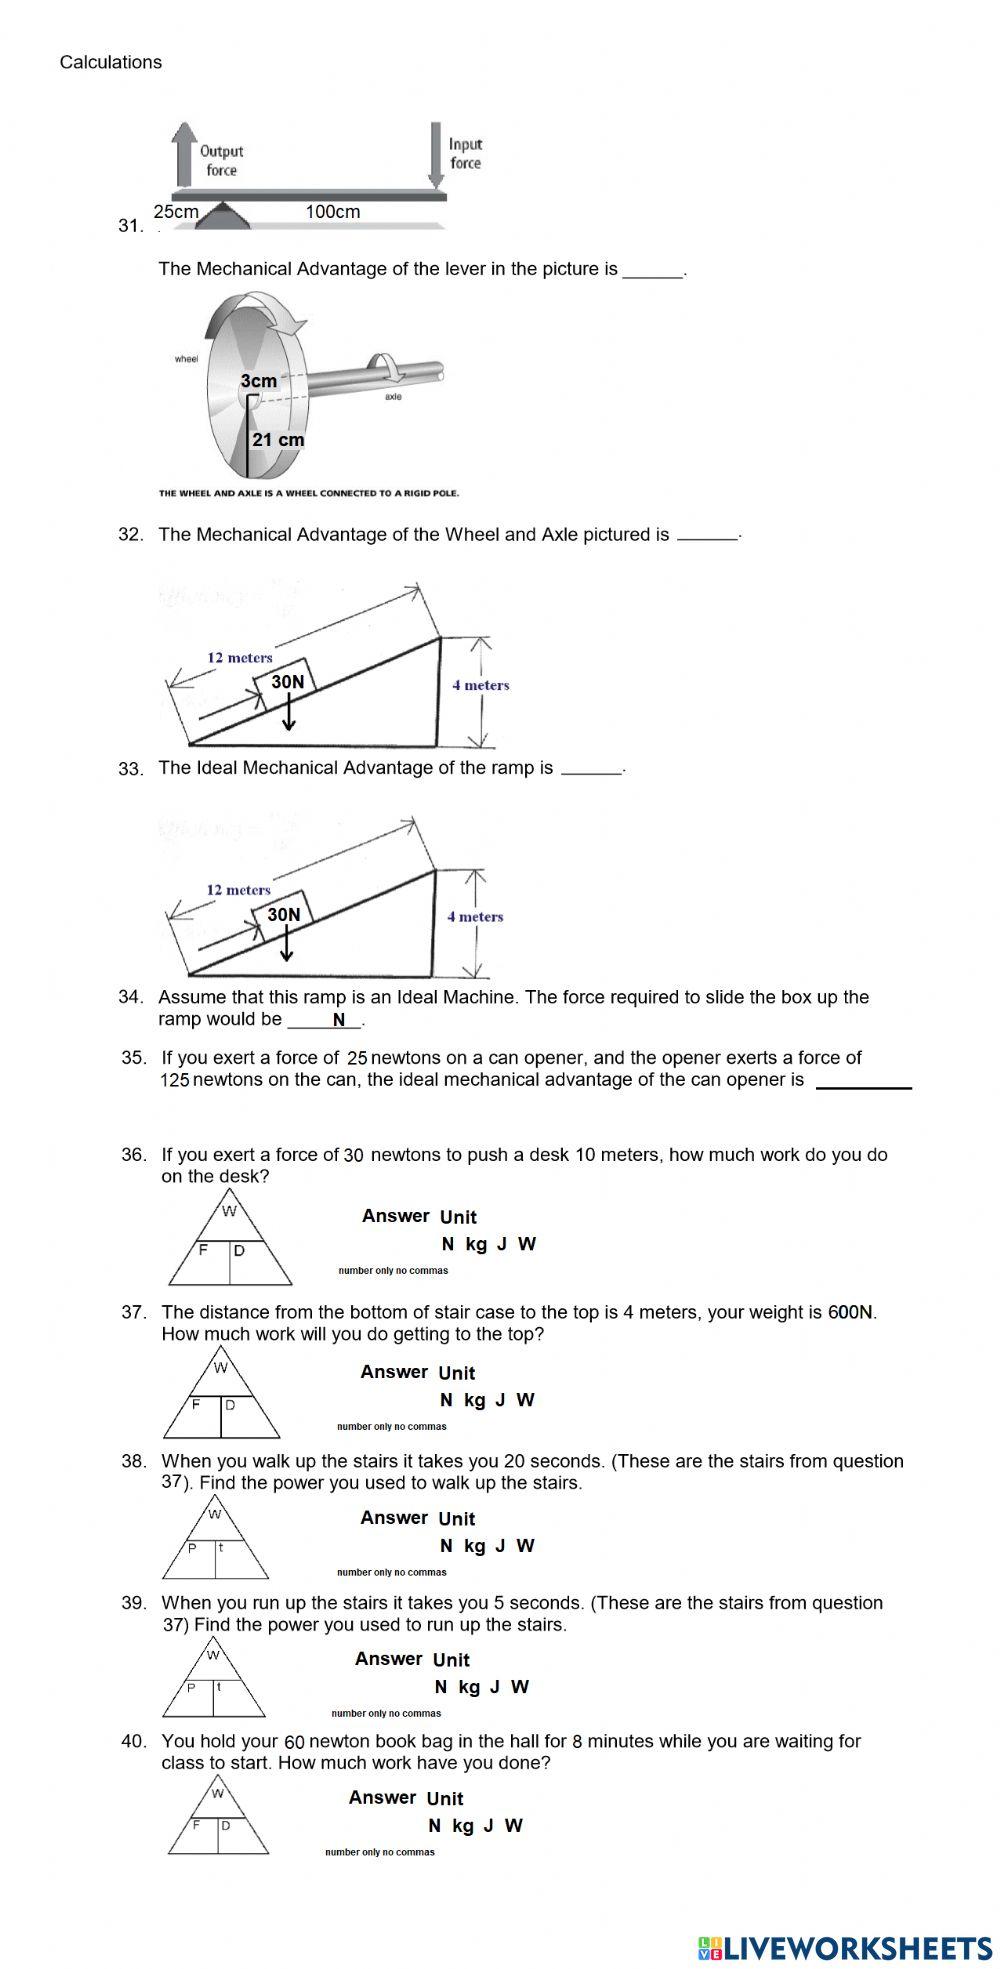 PS-12-Unit Study Guide page 4